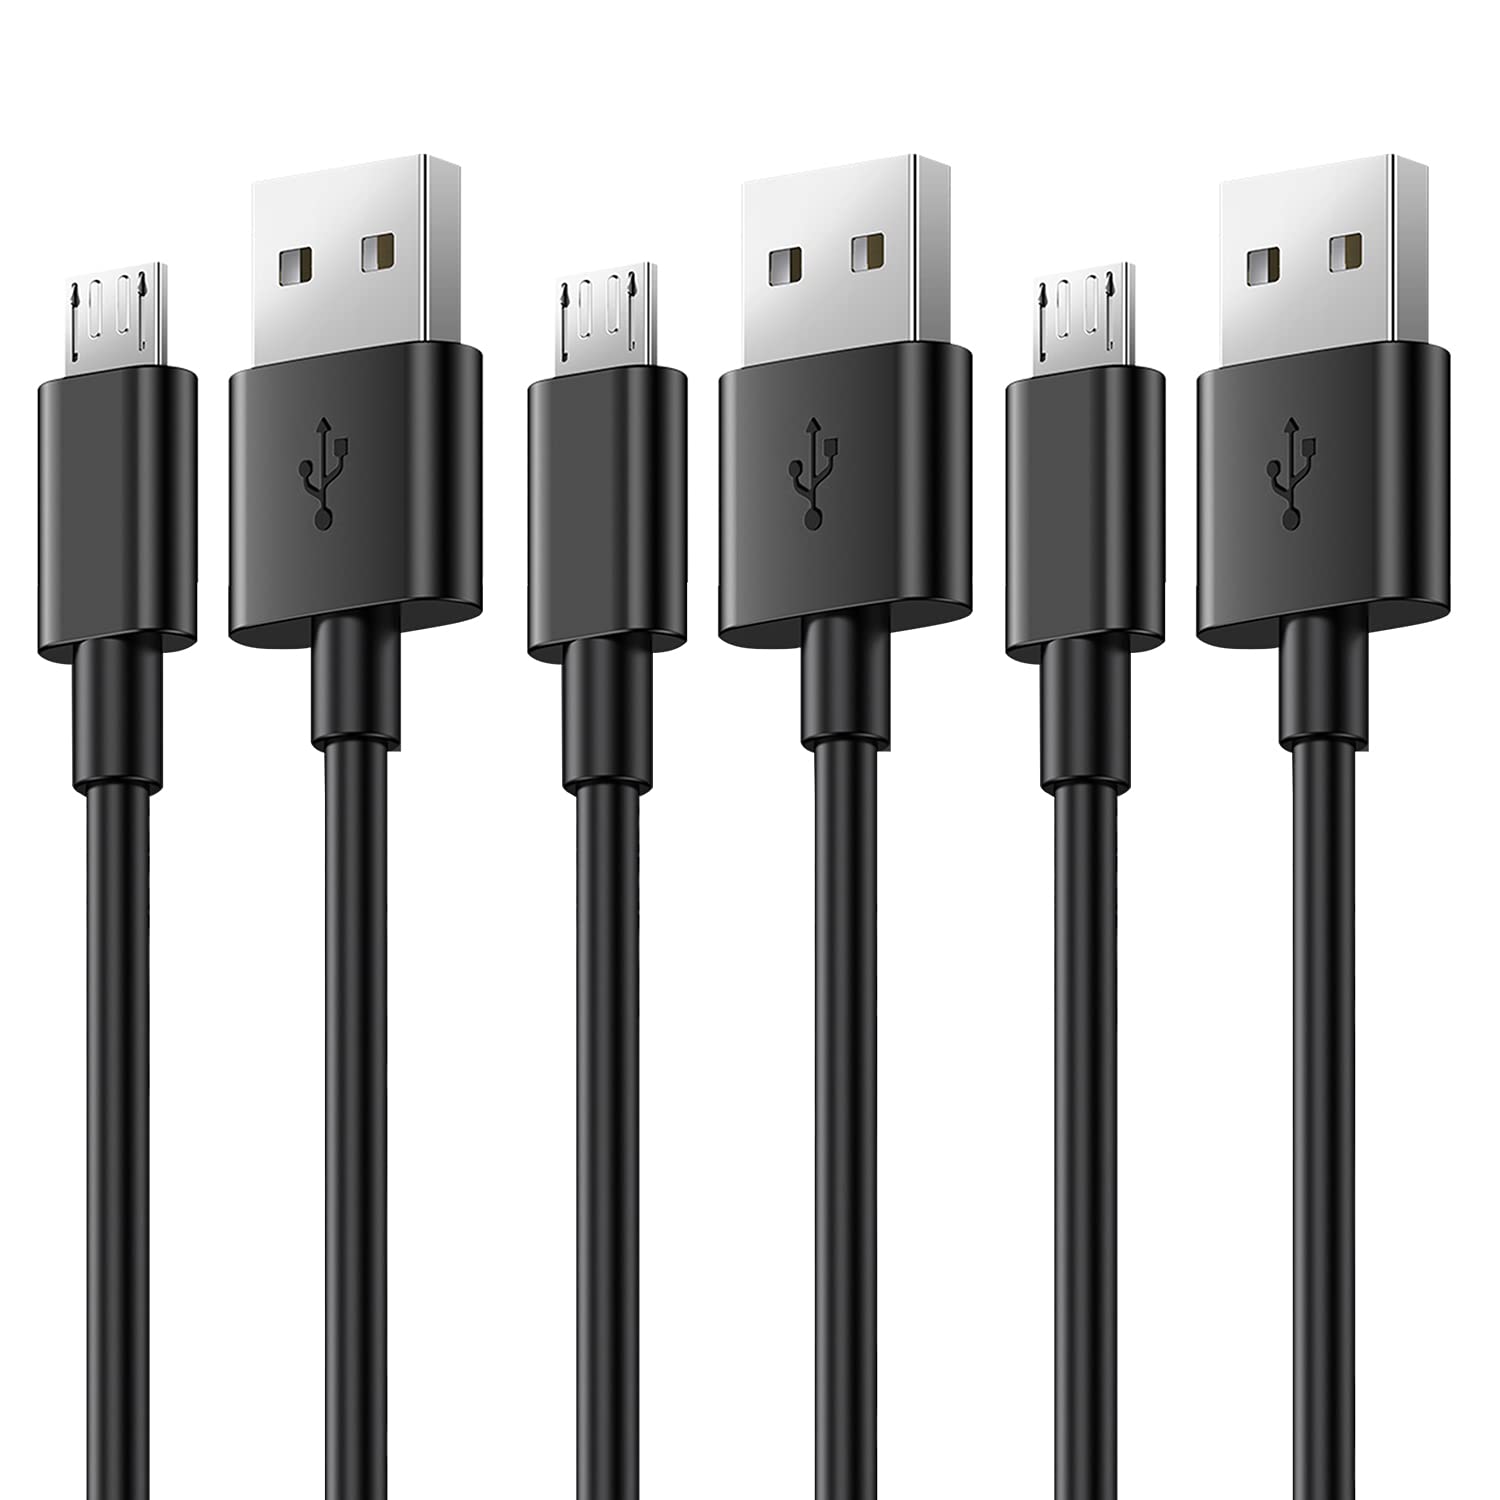 Book Cover Ailun Micro USB Cable 3ft 3Pack High Speed 2.0 USB A Male to Micro USB Sync Charging Nylon Braided Cable with 56k Ohm Pull-up Resistor for Smartphone Tablets Black 3ft+3ft+3ft Black